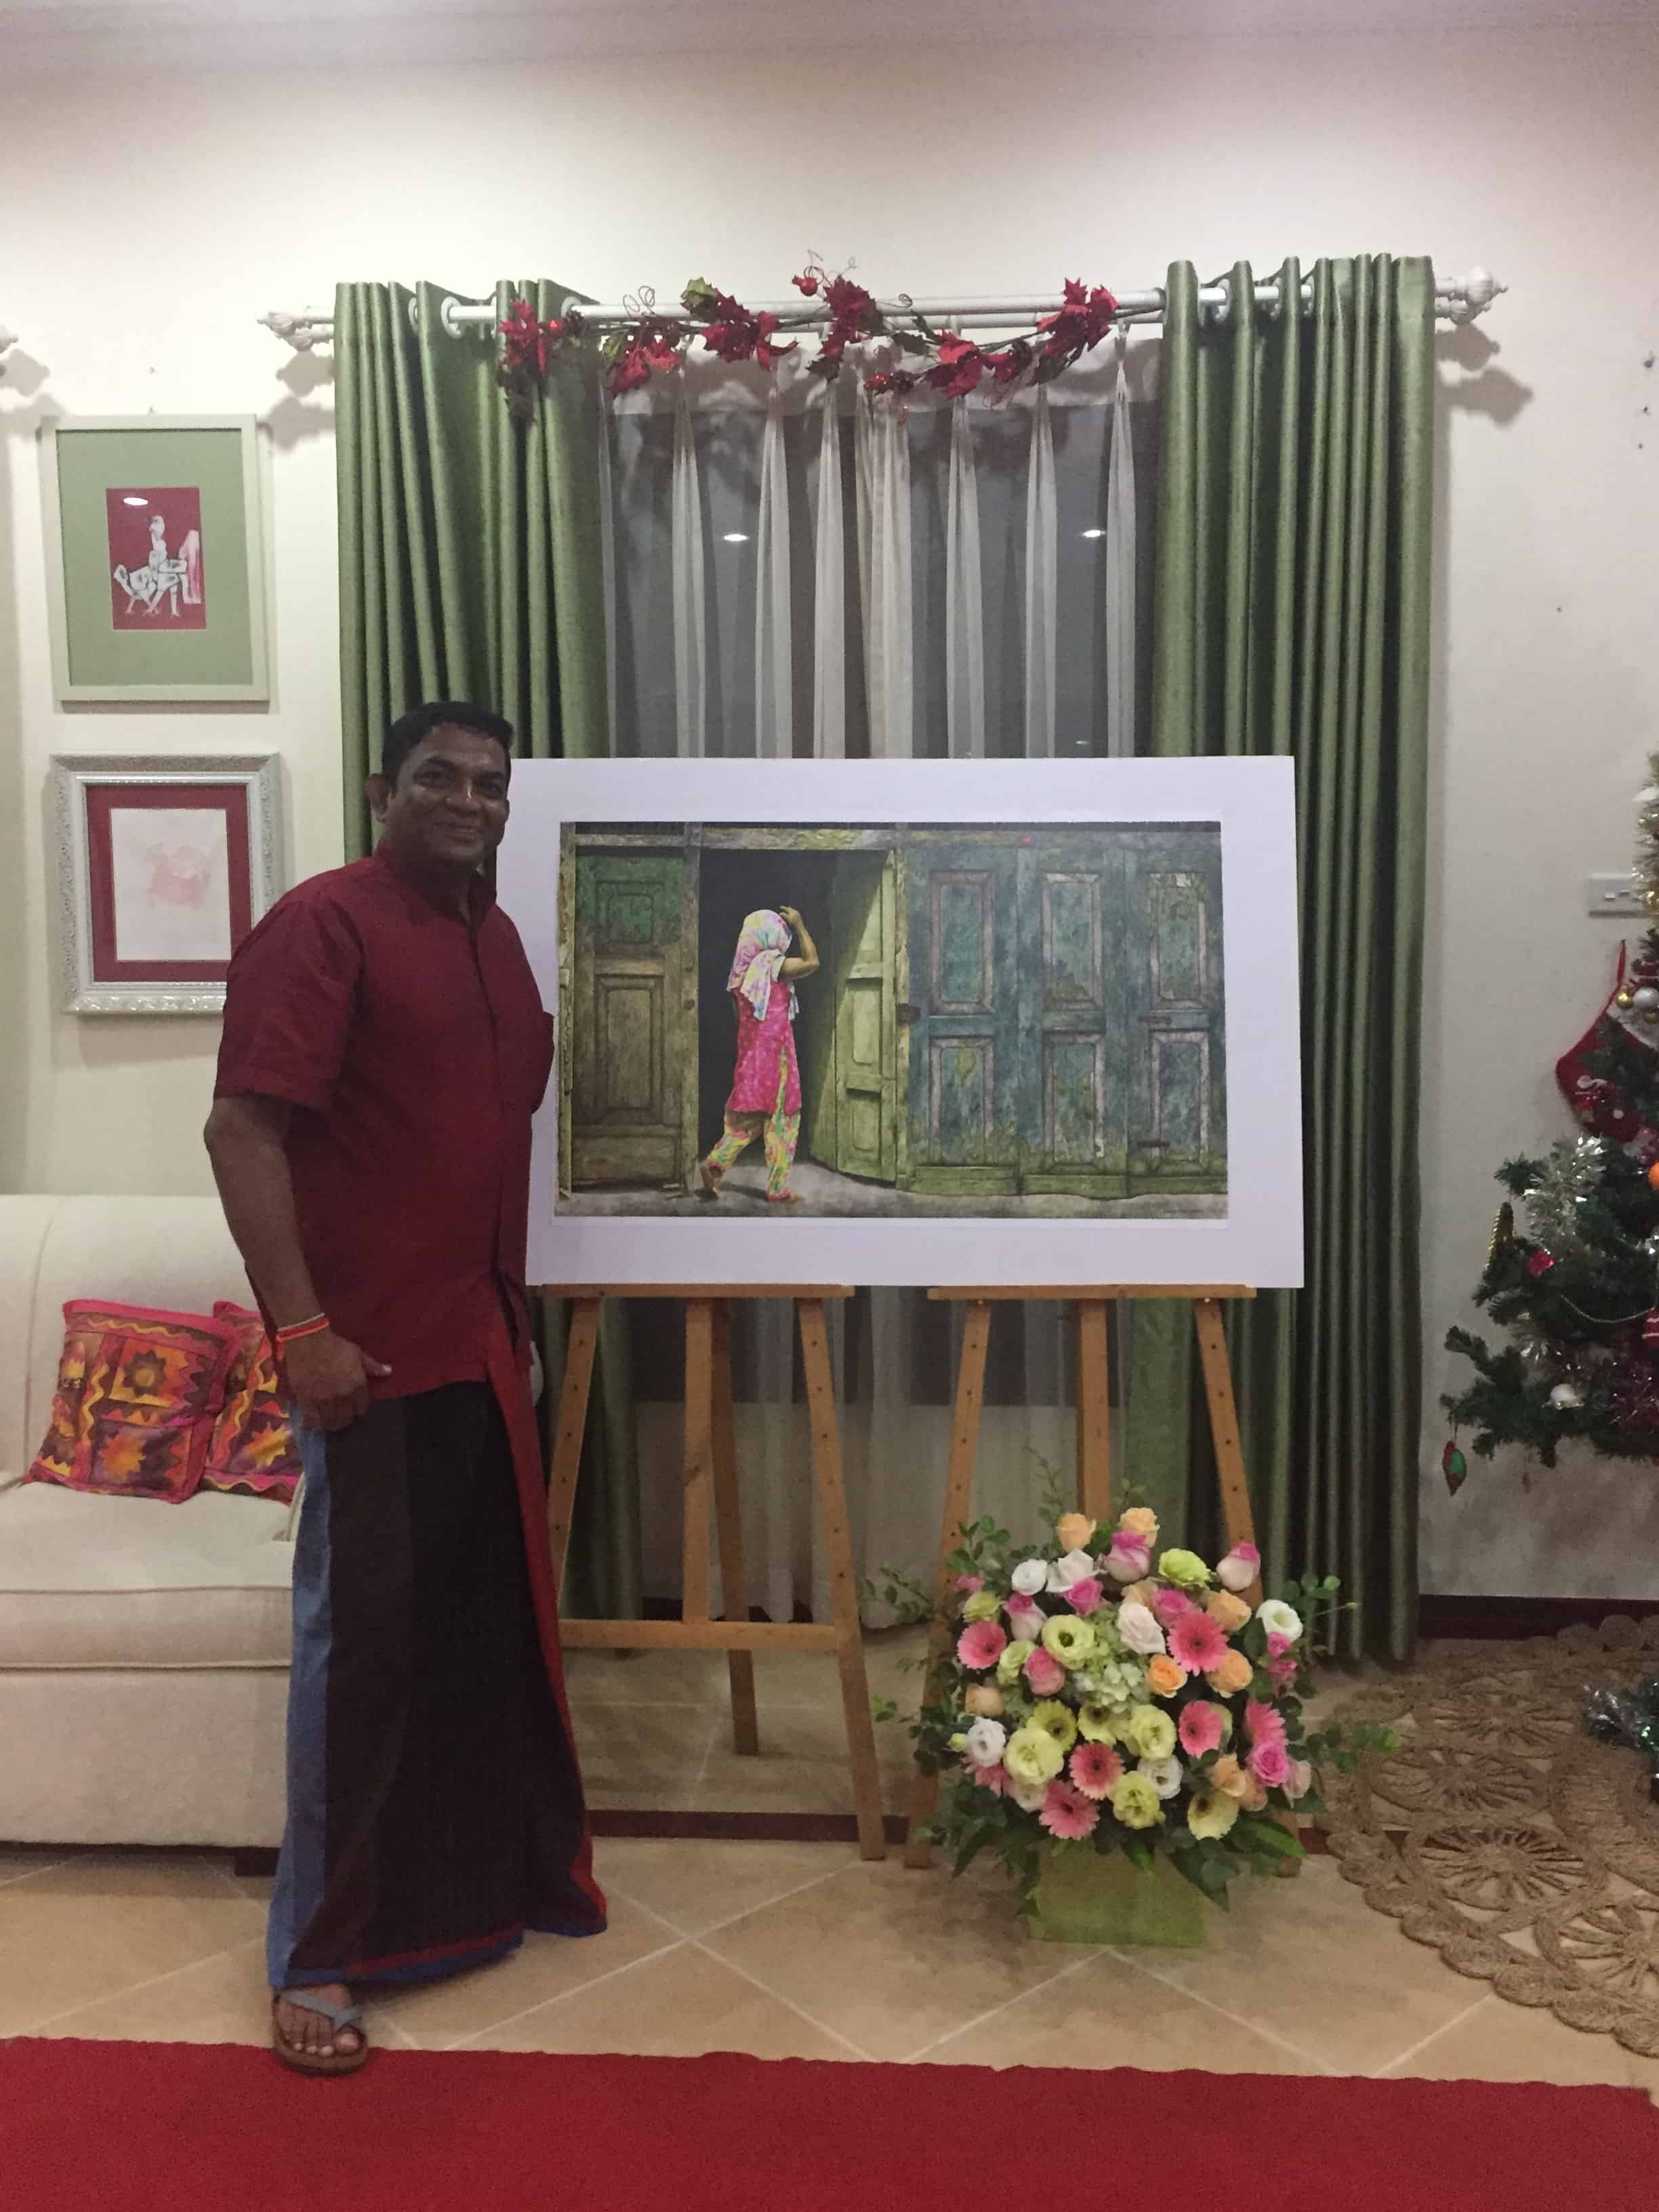 Image 5 - Vasantha with one of his art works